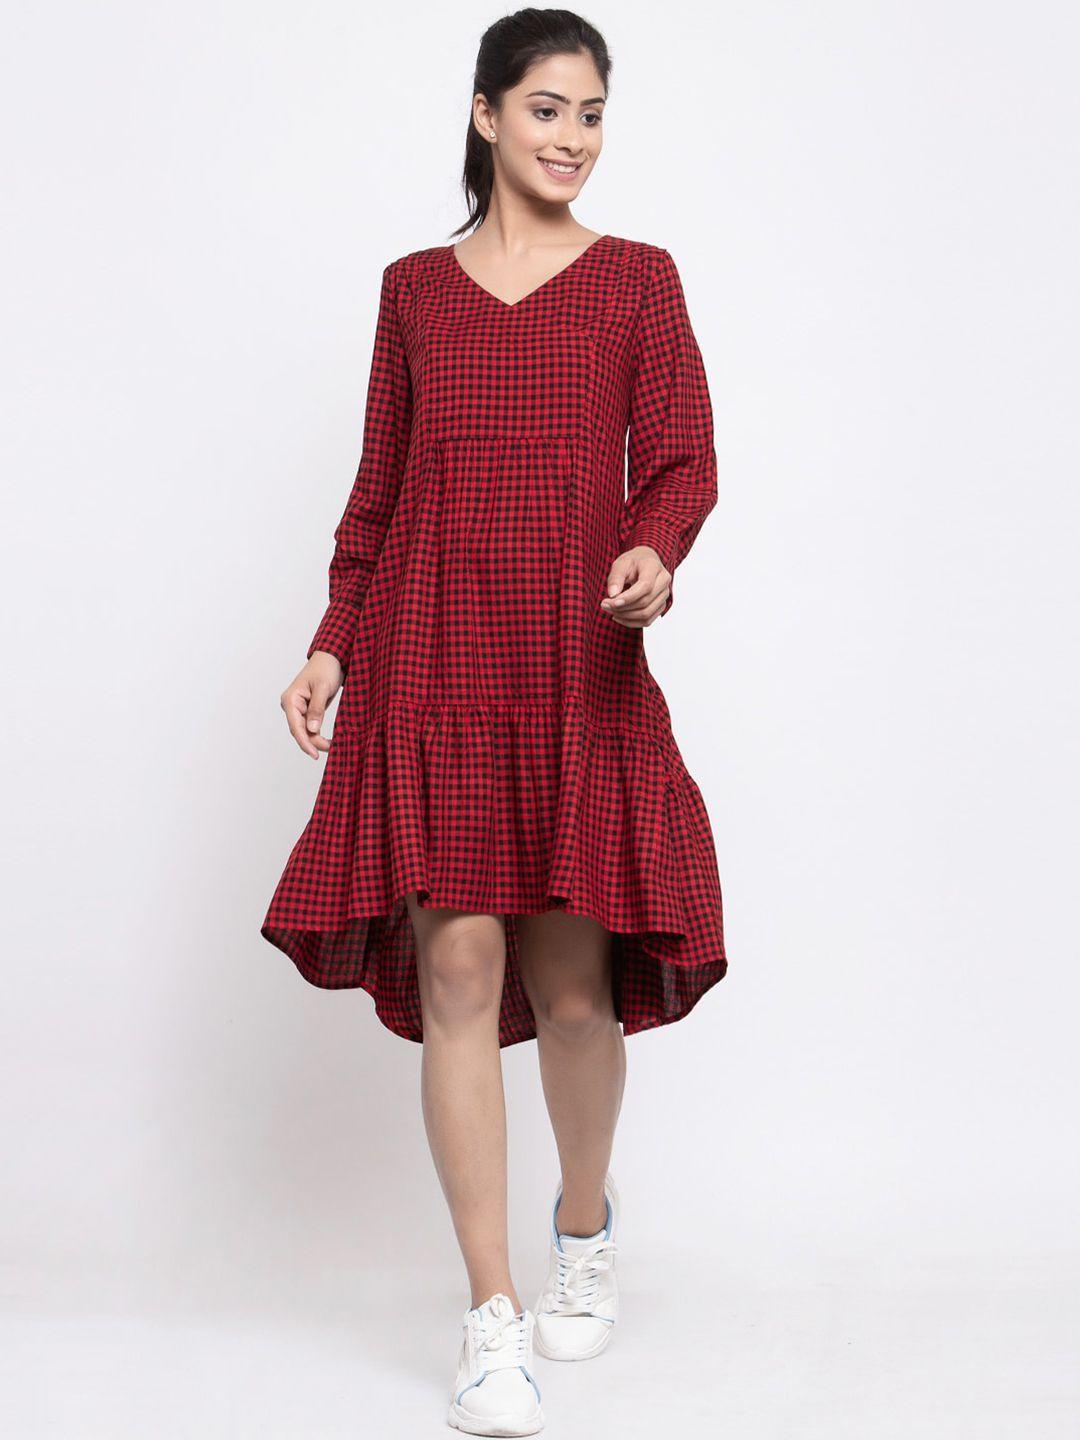 terquois-women-red-printed-oversized-drop-waist-dress